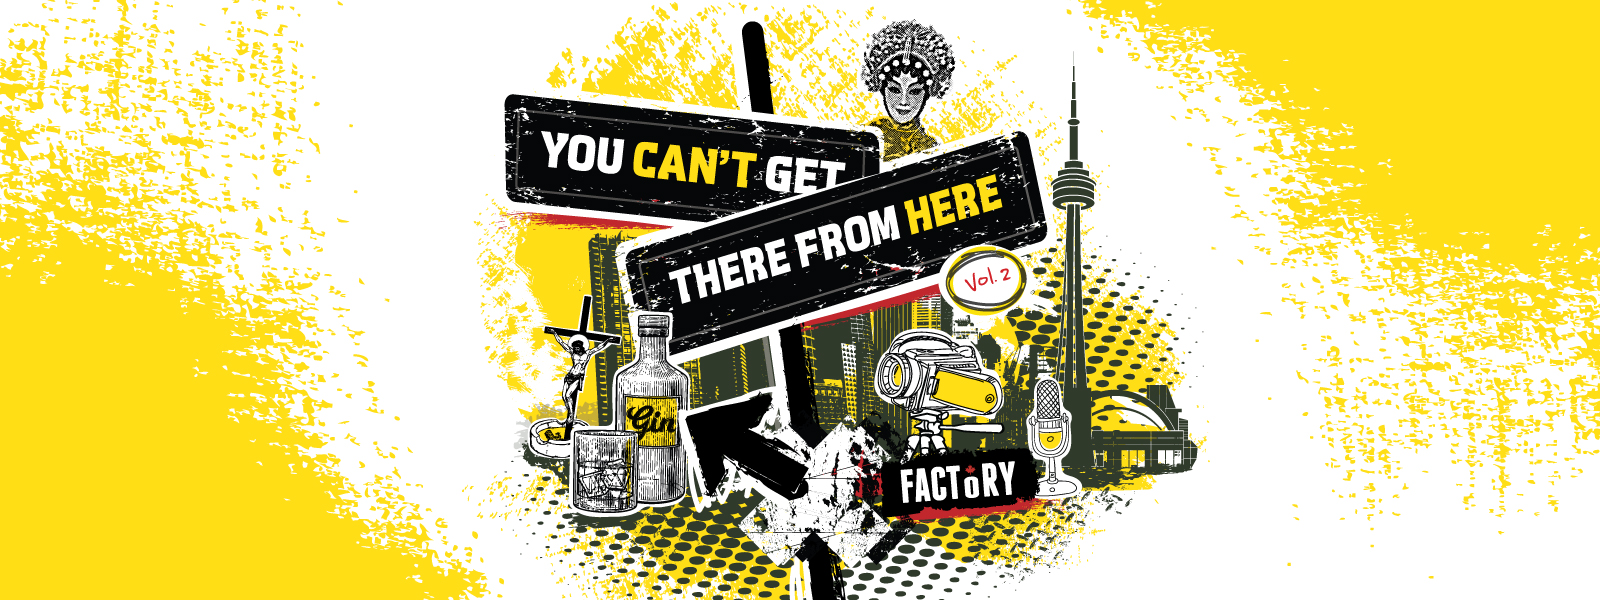 You Can’t Get There From Here, Vol. 2 show poster